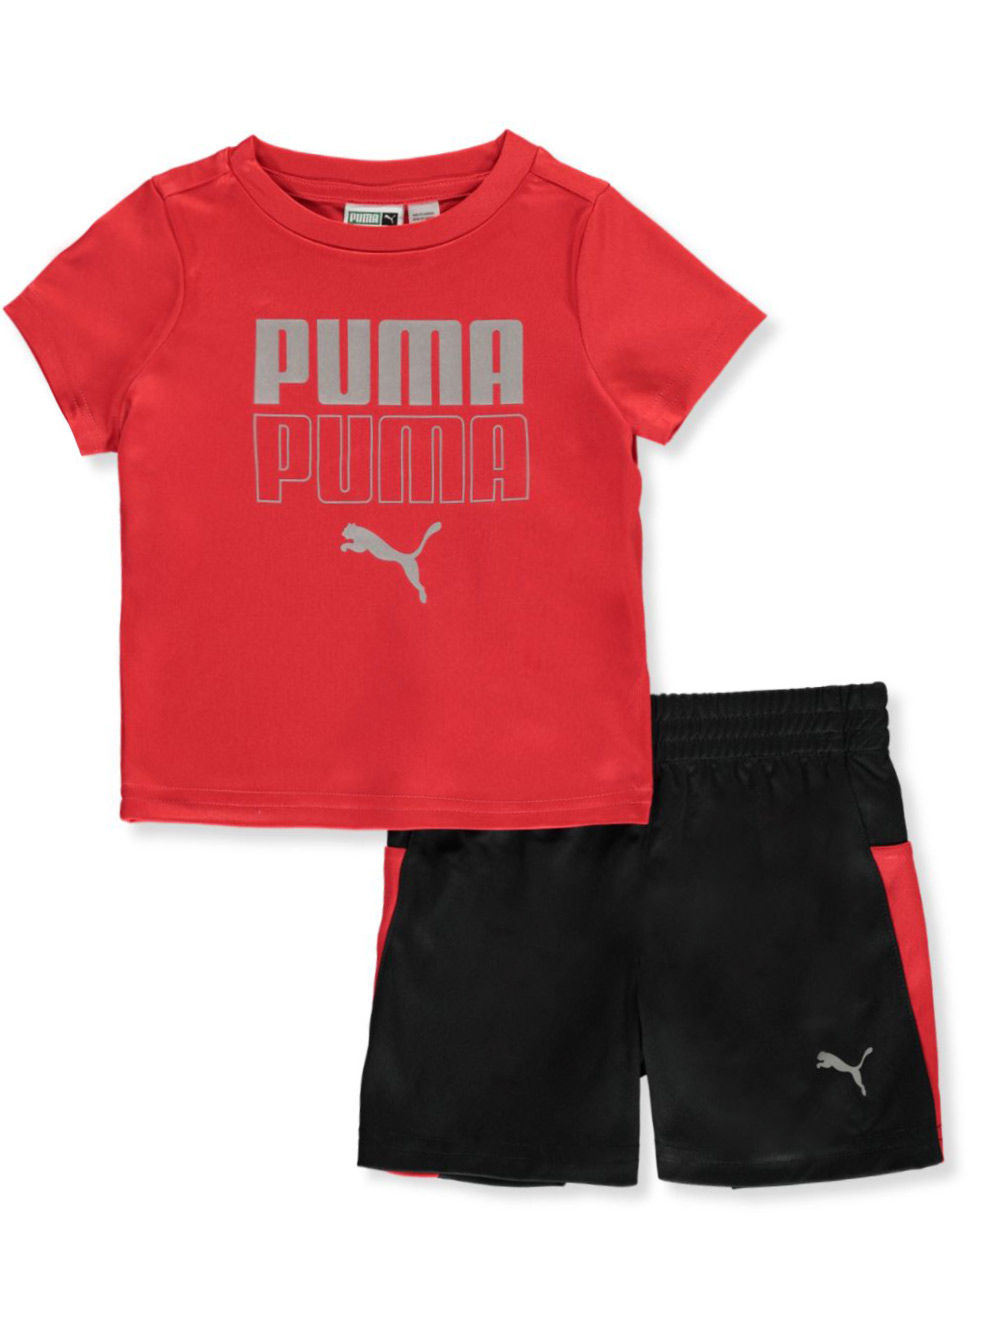 red pumas outfit